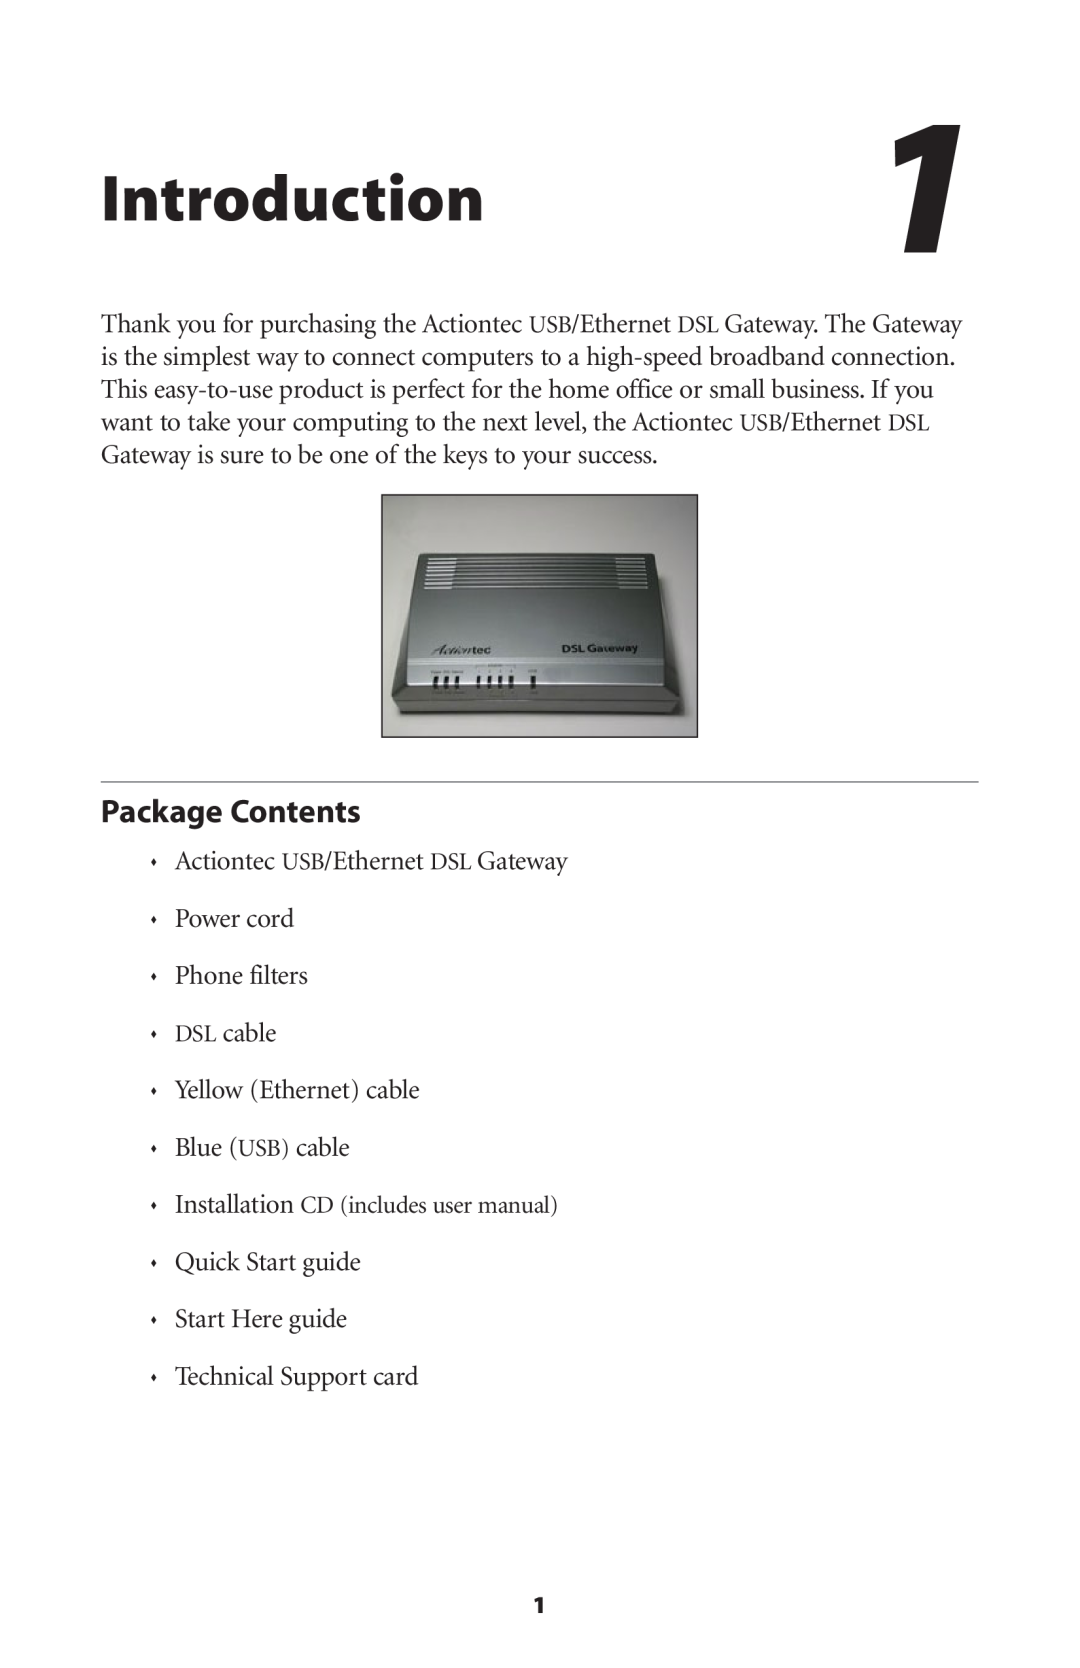 Gateway GT704 user manual Introduction1, Package Contents 